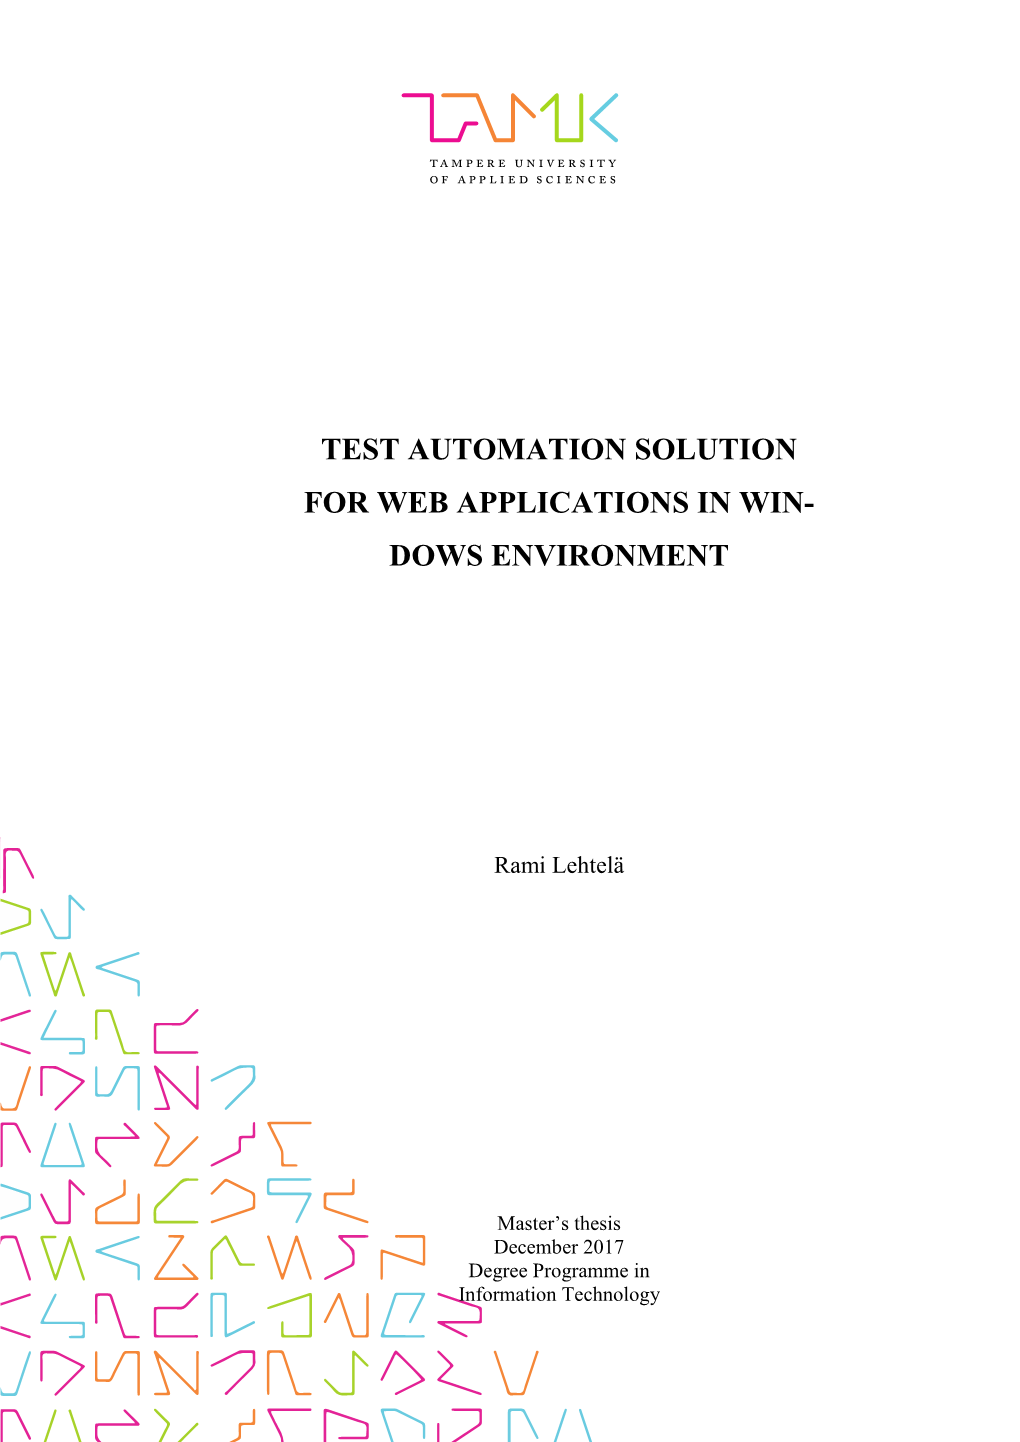 Test Automation Solution for Web Applications in Win- Dows Environment